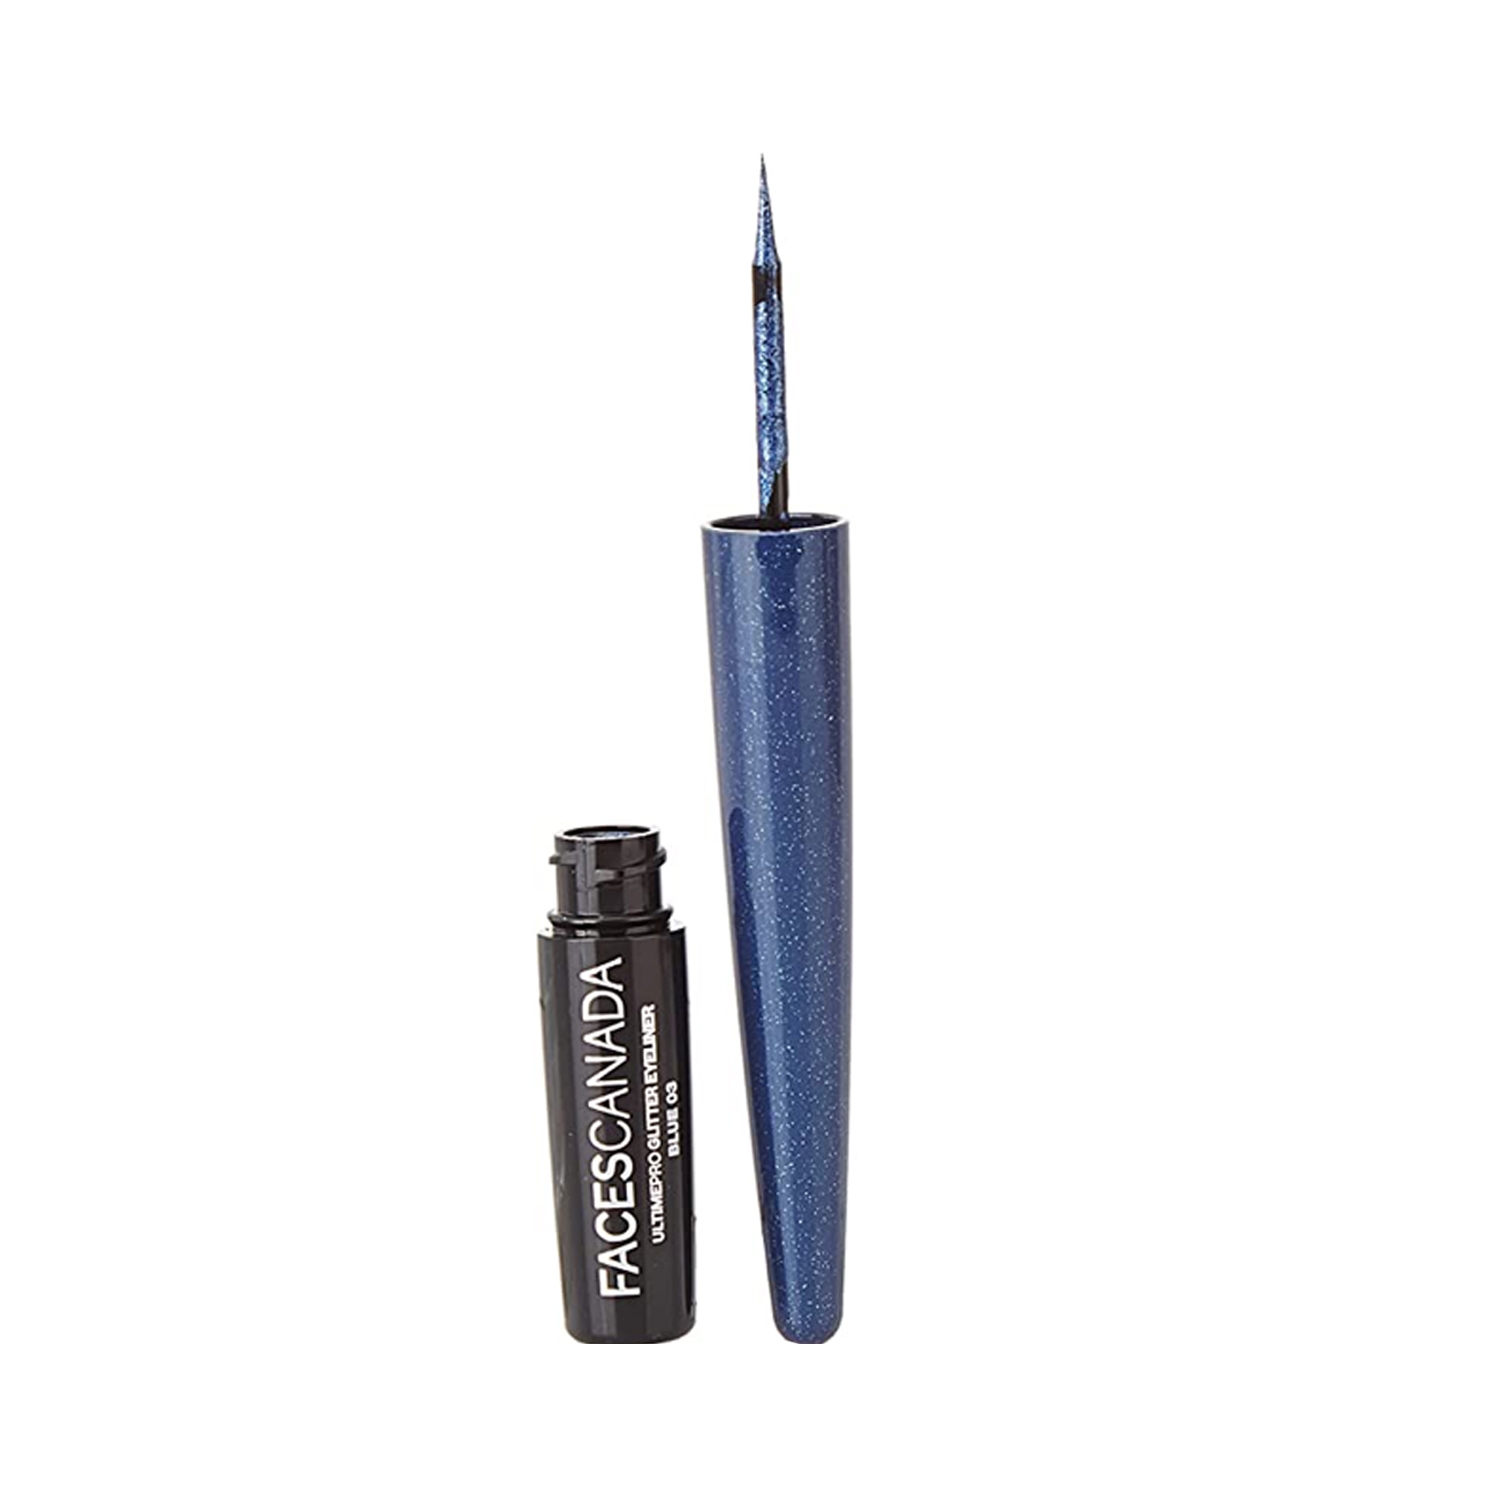 Faces Canada | Faces Canada Ultime Pro Glitter Eyeliner - 03 Blue (1.7ml)